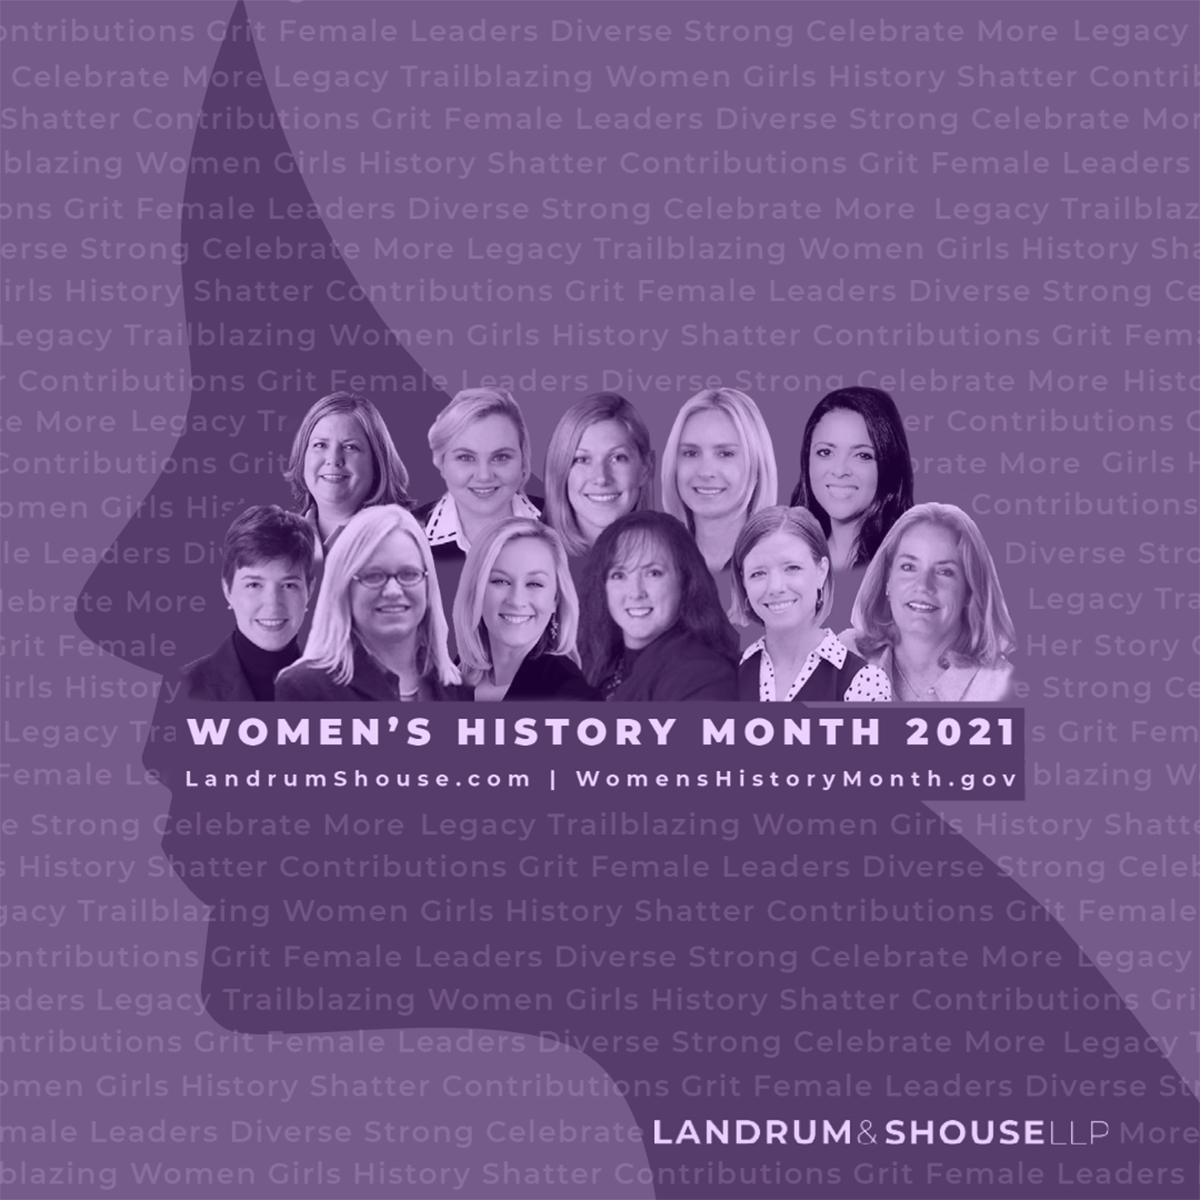 Women's history month 2021 represented by the legal professionals of Landrum & Shouse LLP